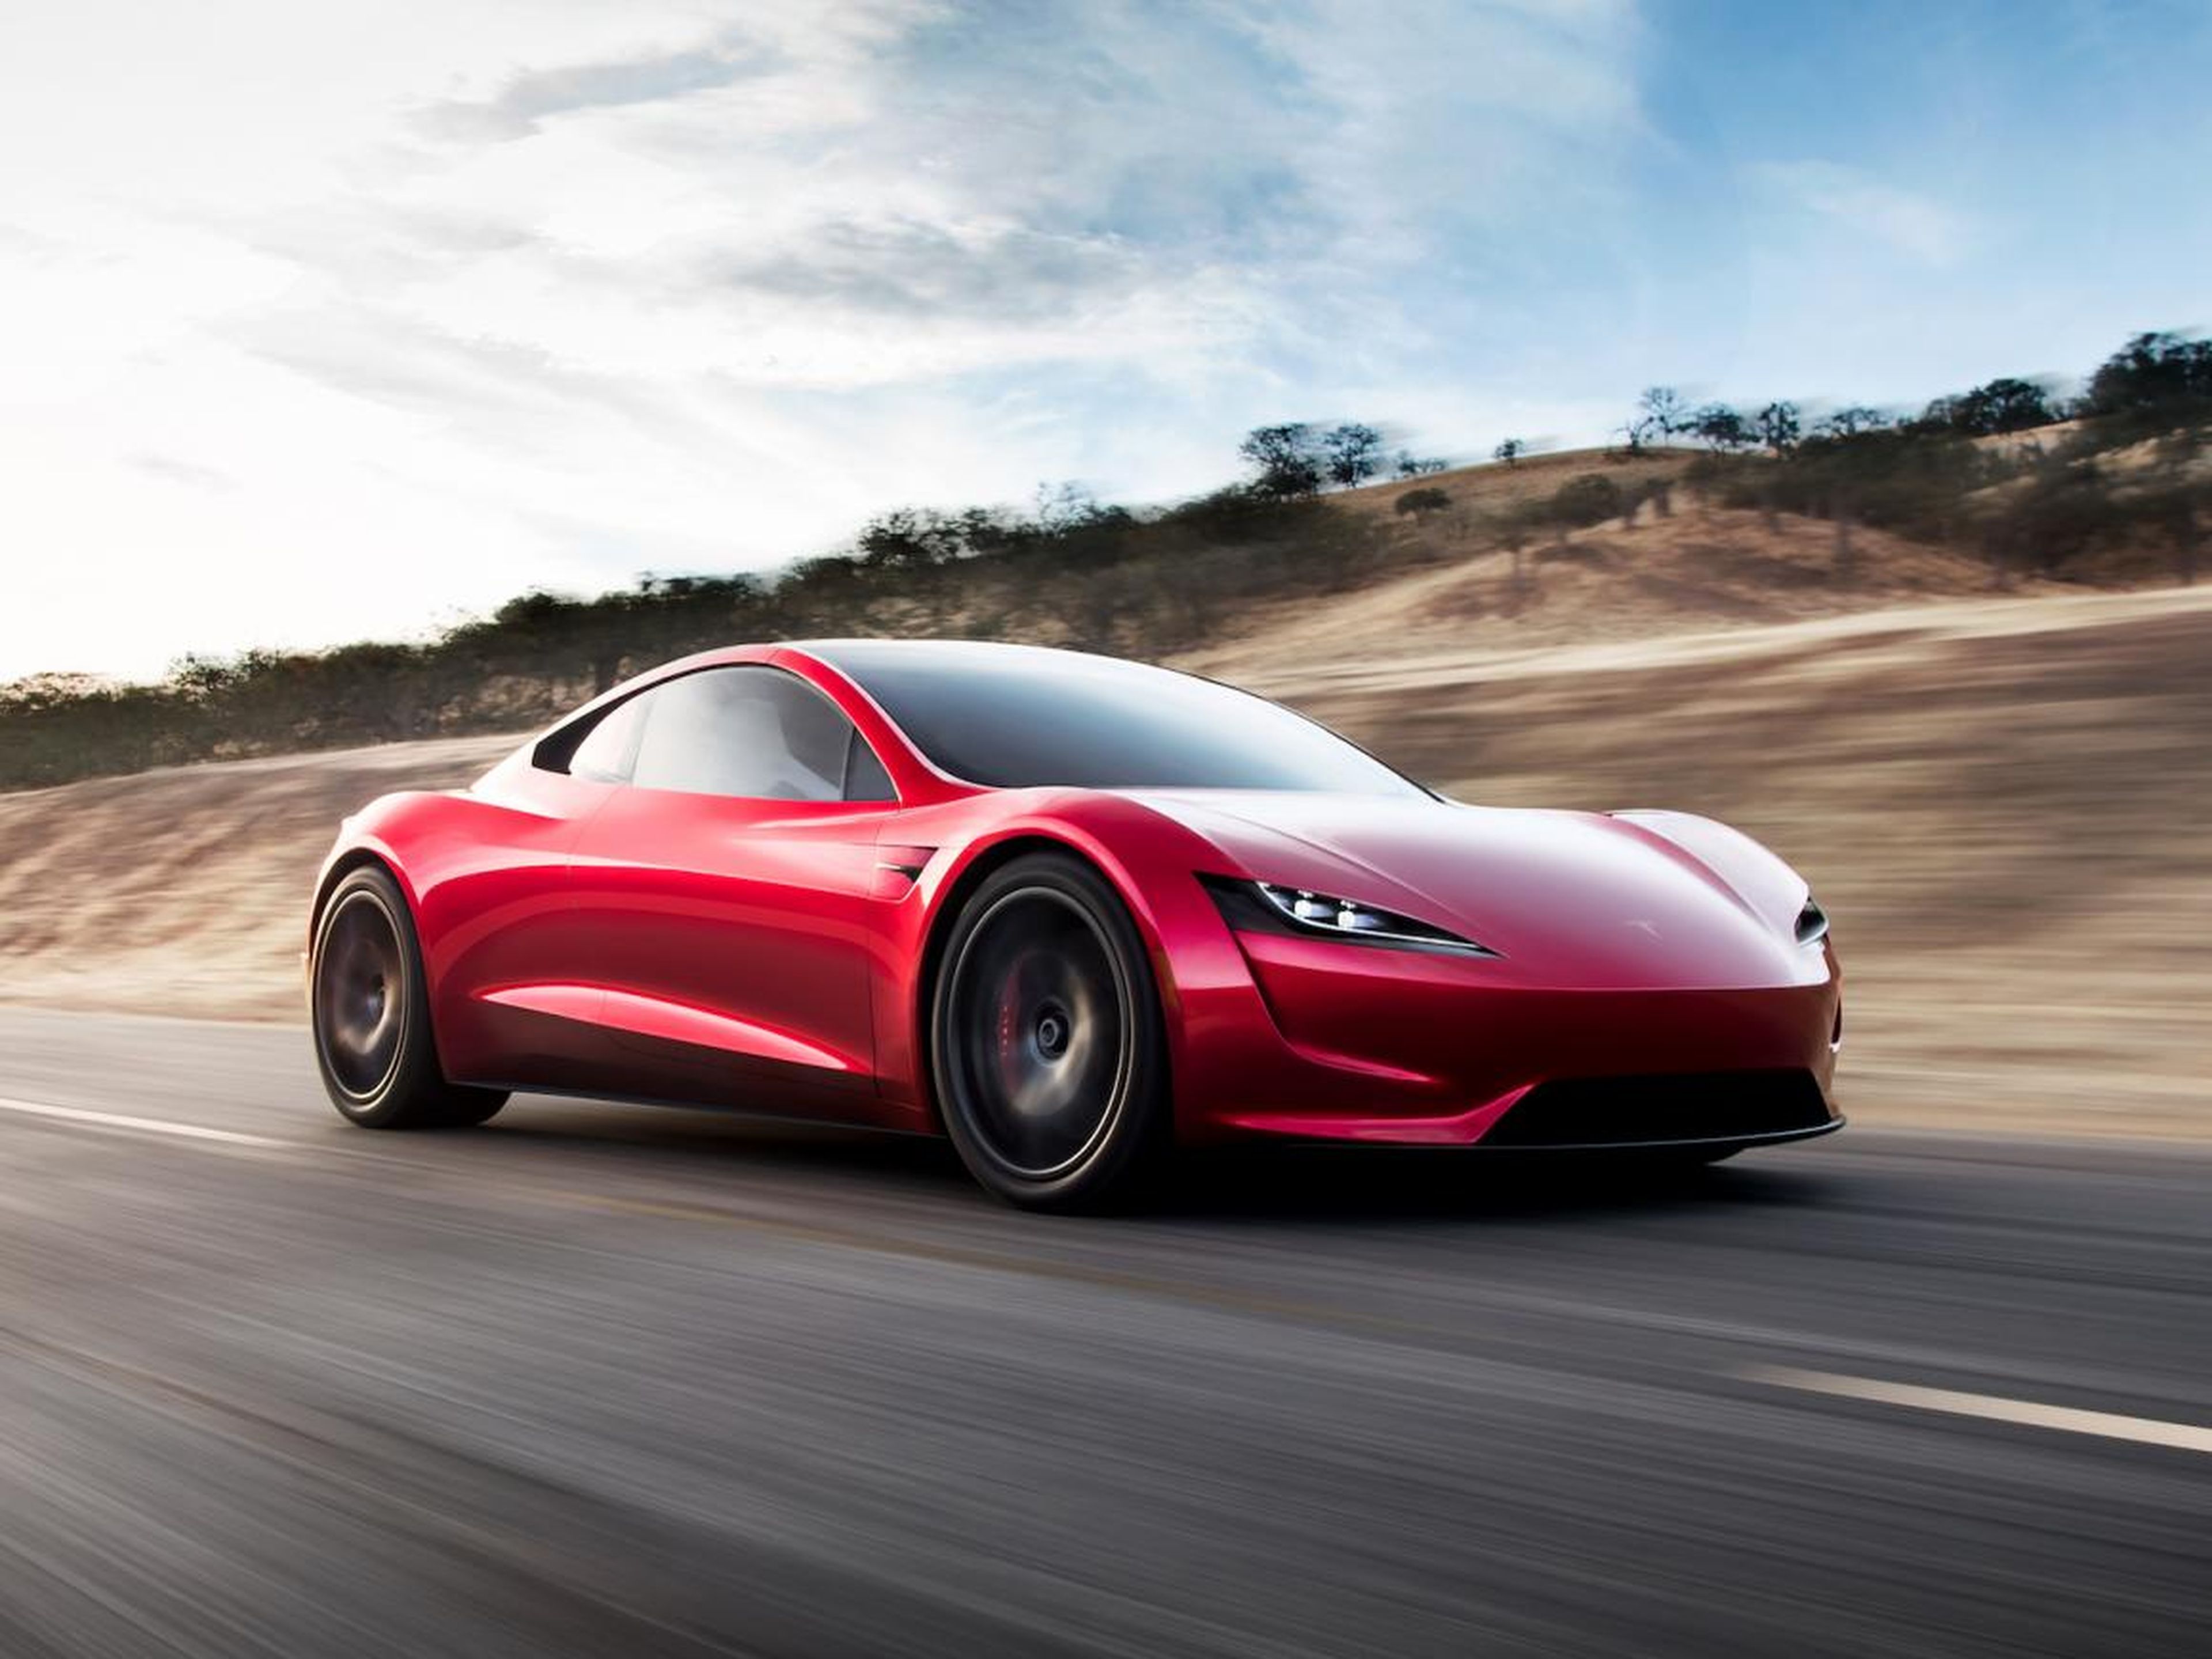 The new Tesla Roadster is expected to arrive in 2020.